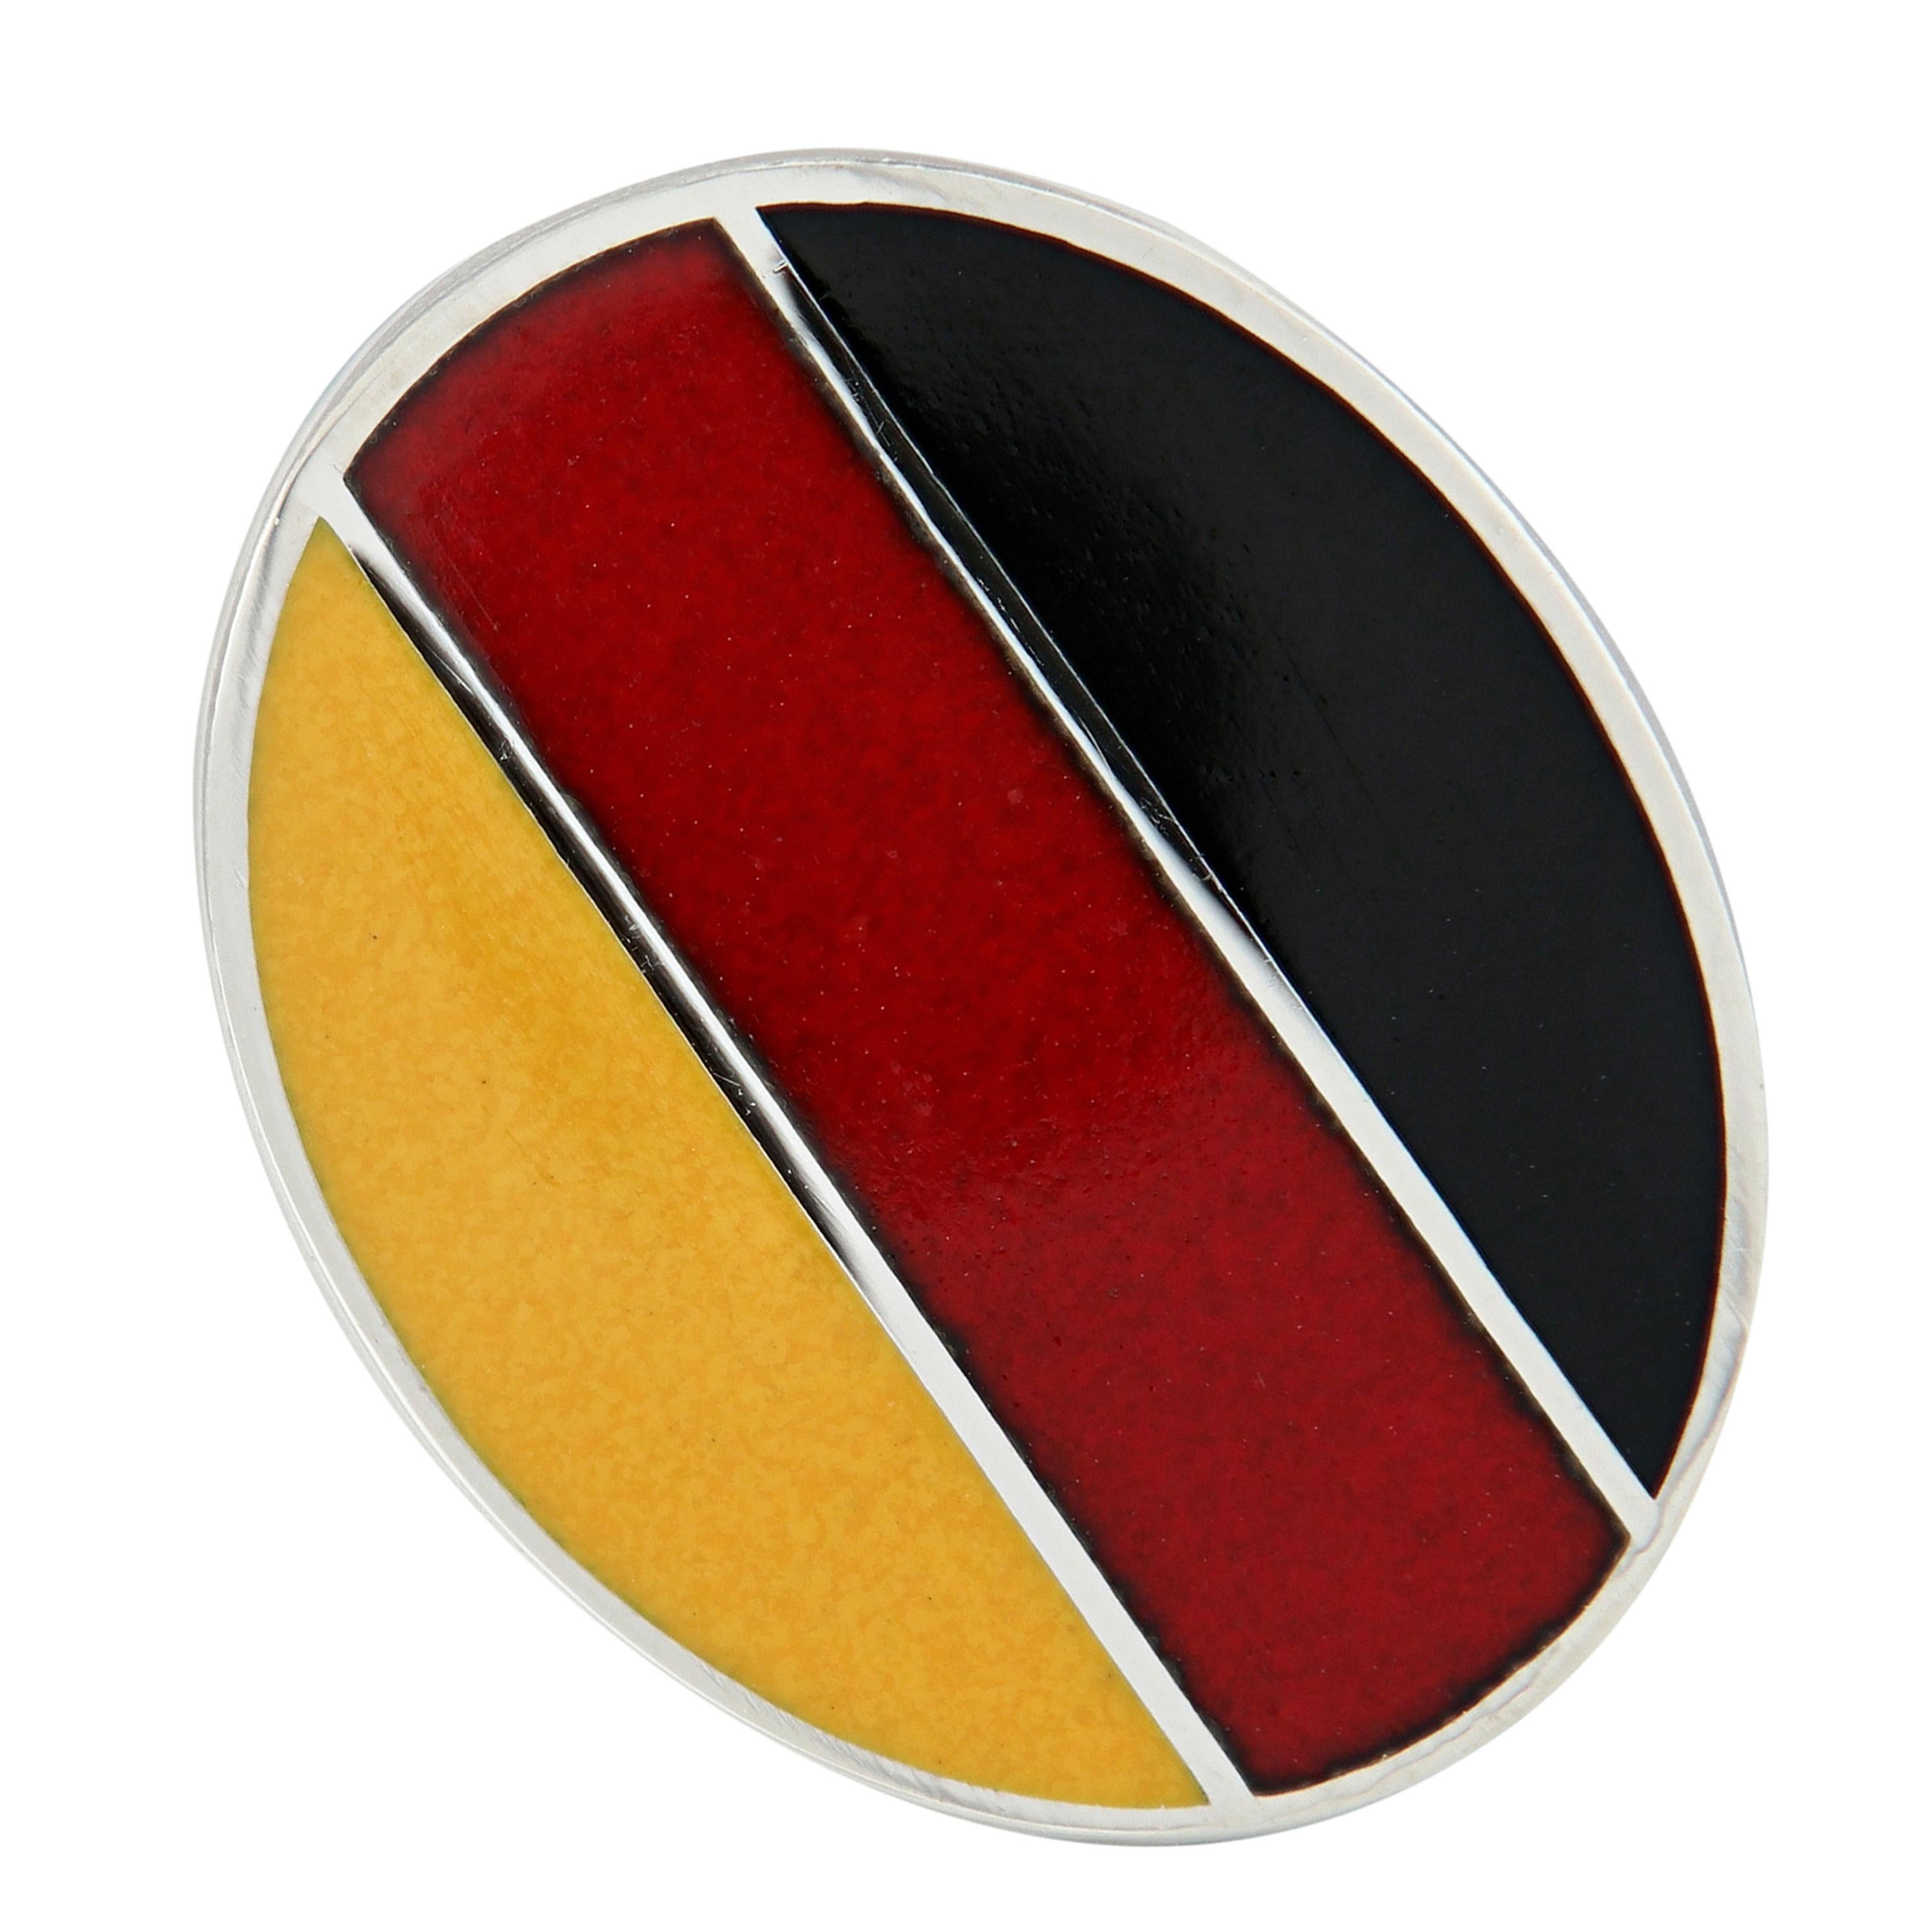 Beautiful Guilloche Enamel German Flag design cufflinks. Handmade in England for 
Campanelli & Pear. Weighs 12.6 grams. Oval measures 15mm x 19mm.